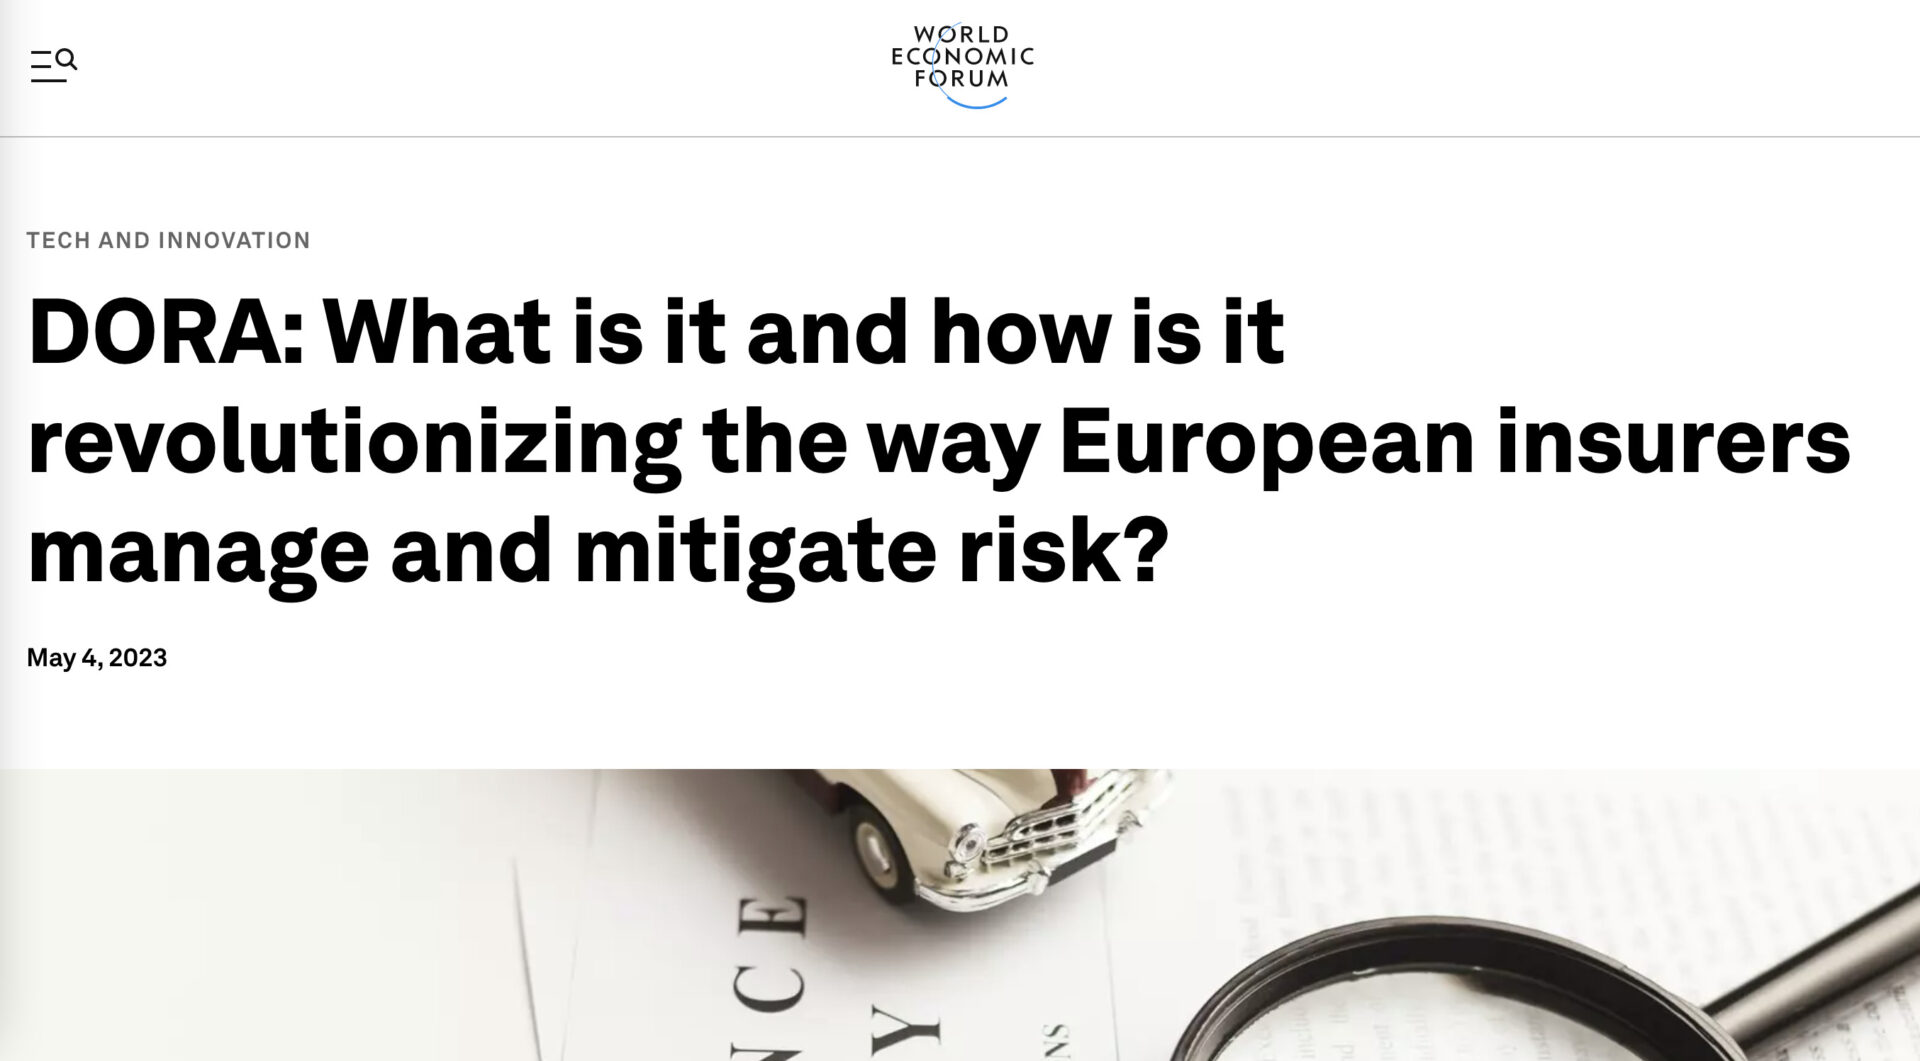 Cyentia Institute research featured in WEF Article for Insurance Risk